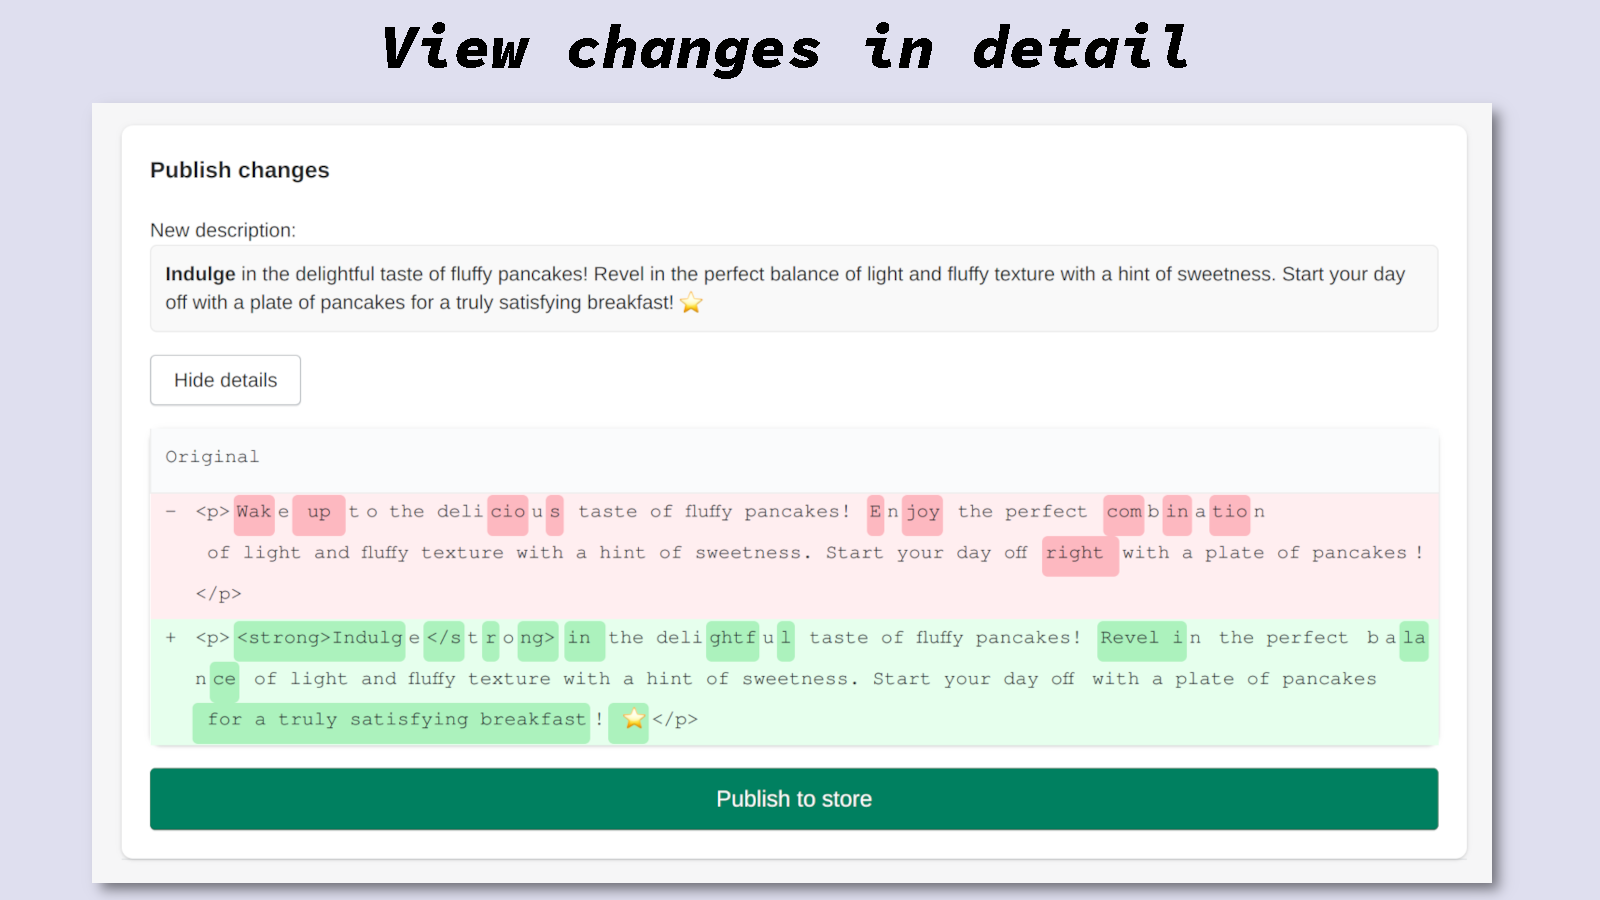 View all changes in detail and publish directly to your Store.